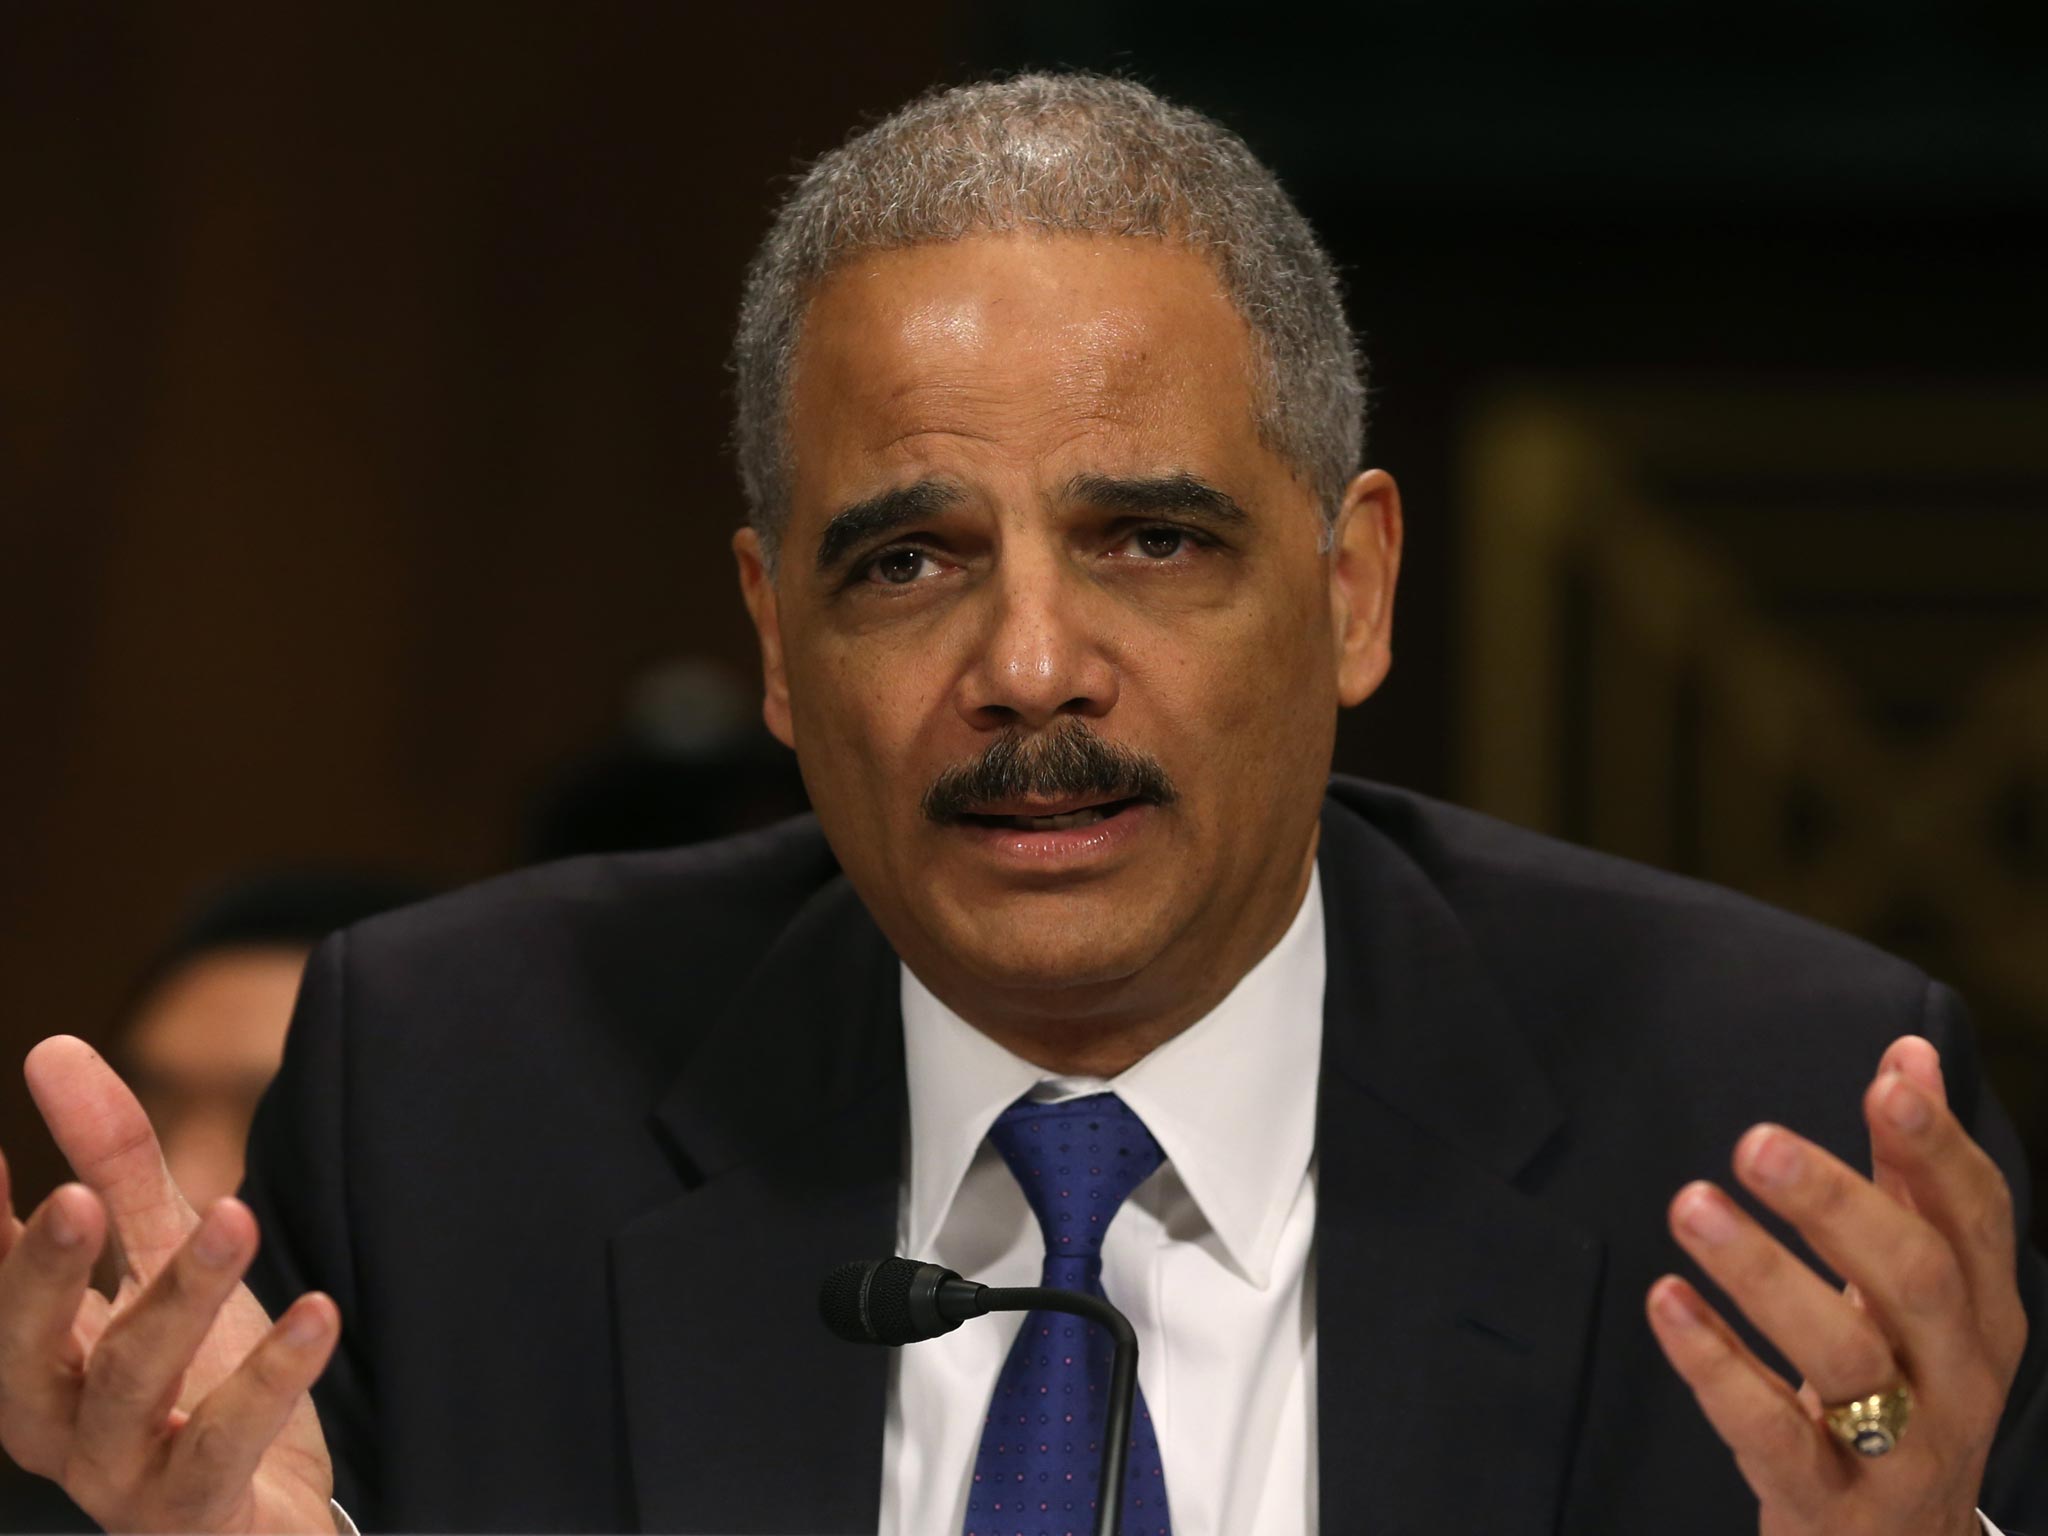 Attorney General Eric Holder said "all lives must be valued" as he announced a civil rights probe into Eric Garner's death